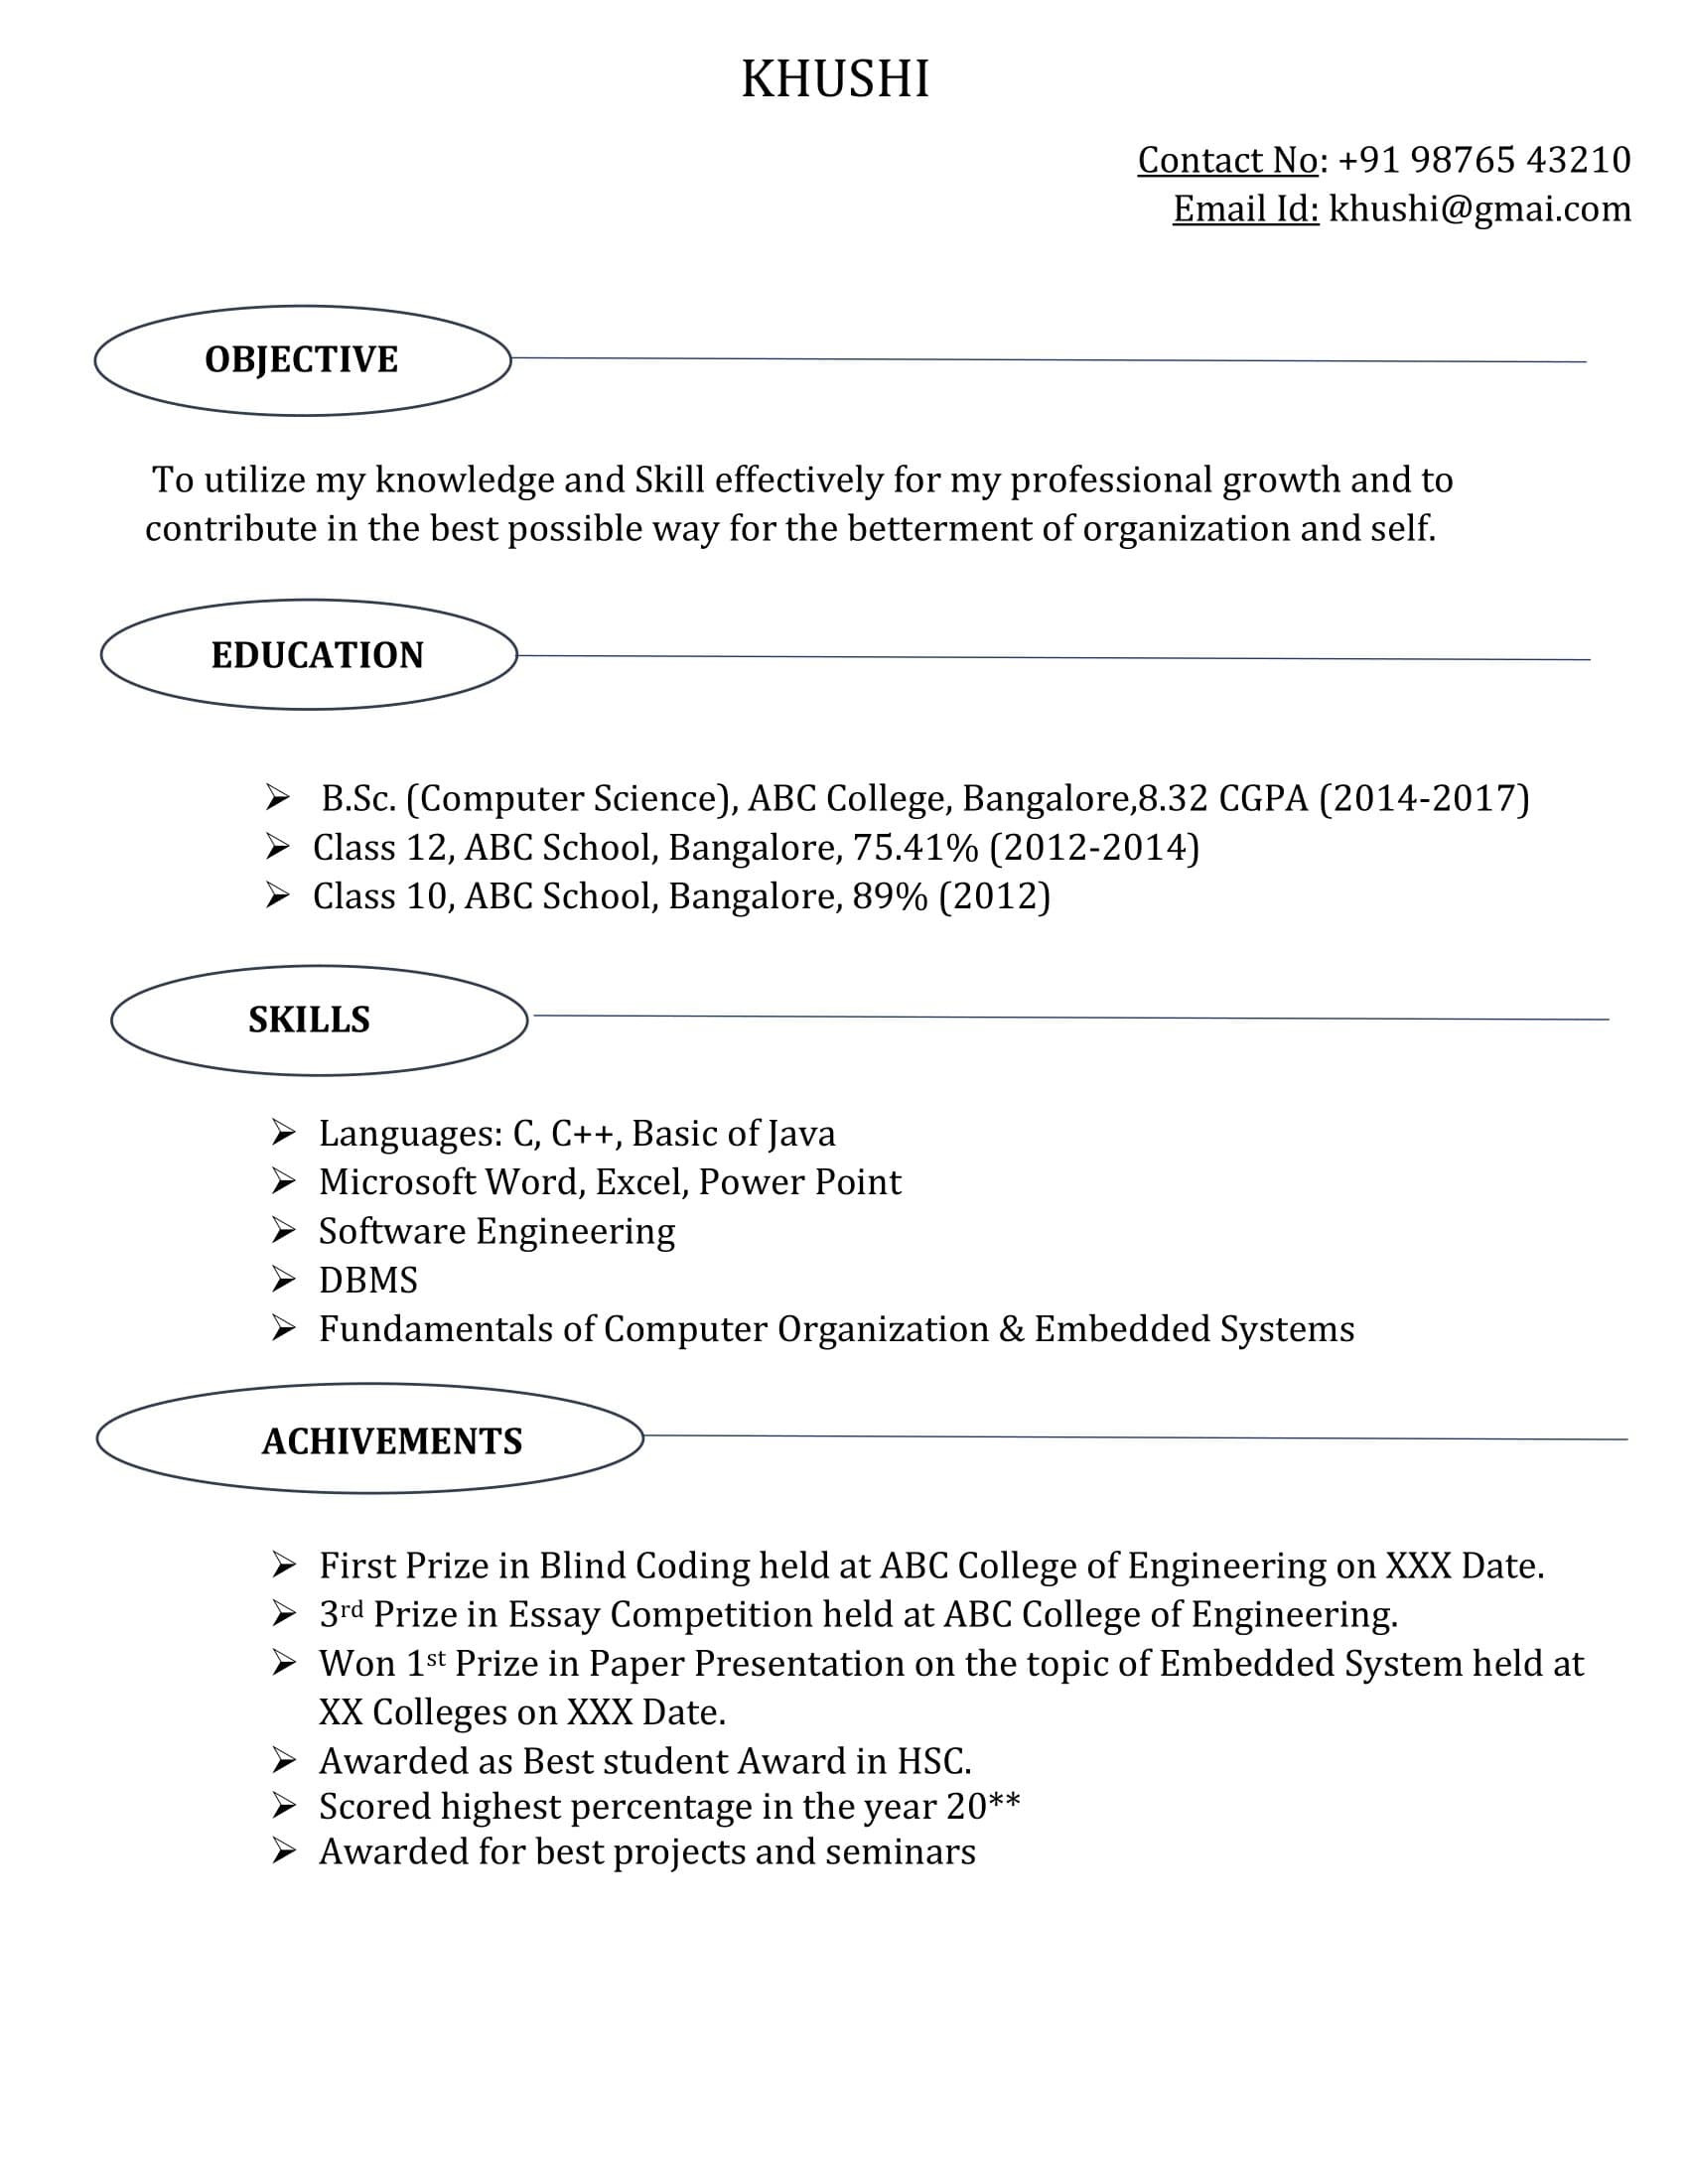 bsc puter science resume template 4